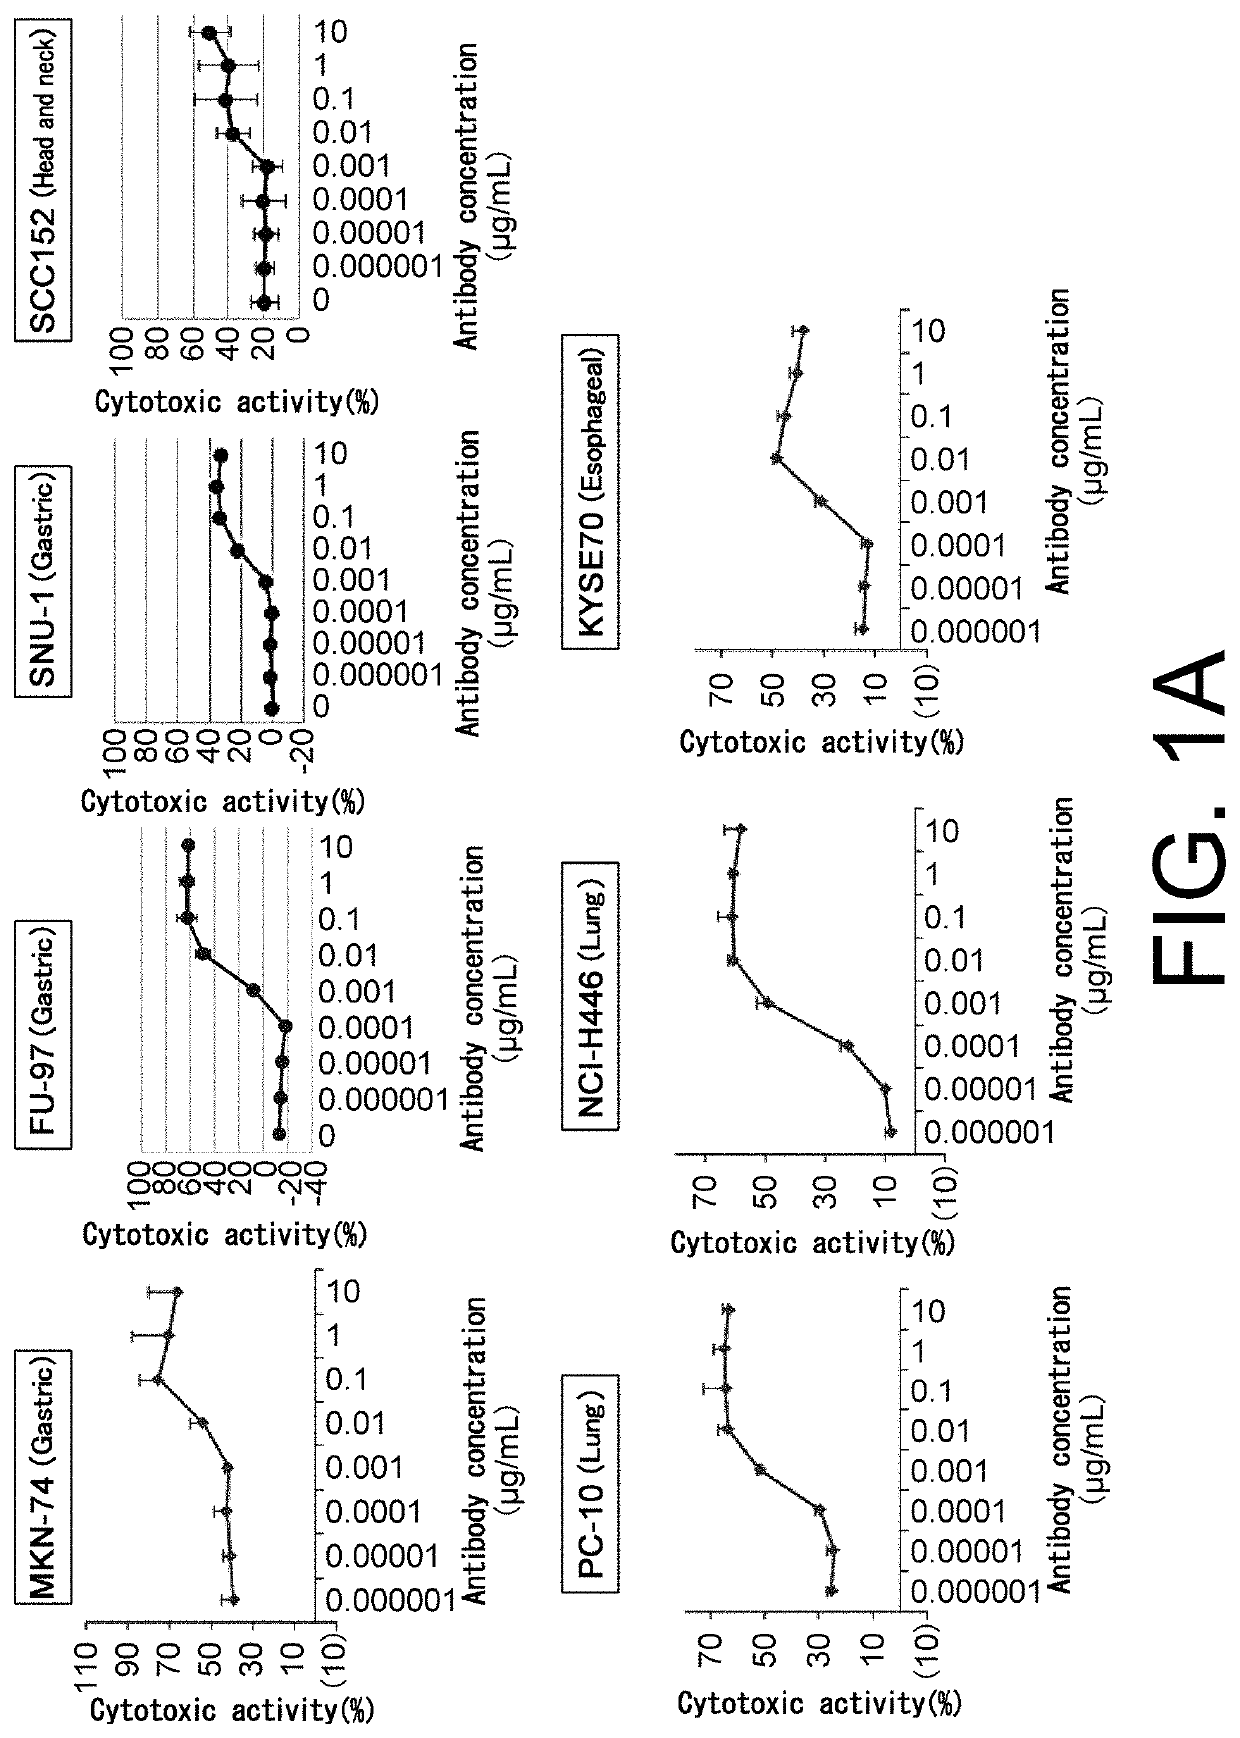 Cell injury inducing therapeutic drug for use in cancer therapy